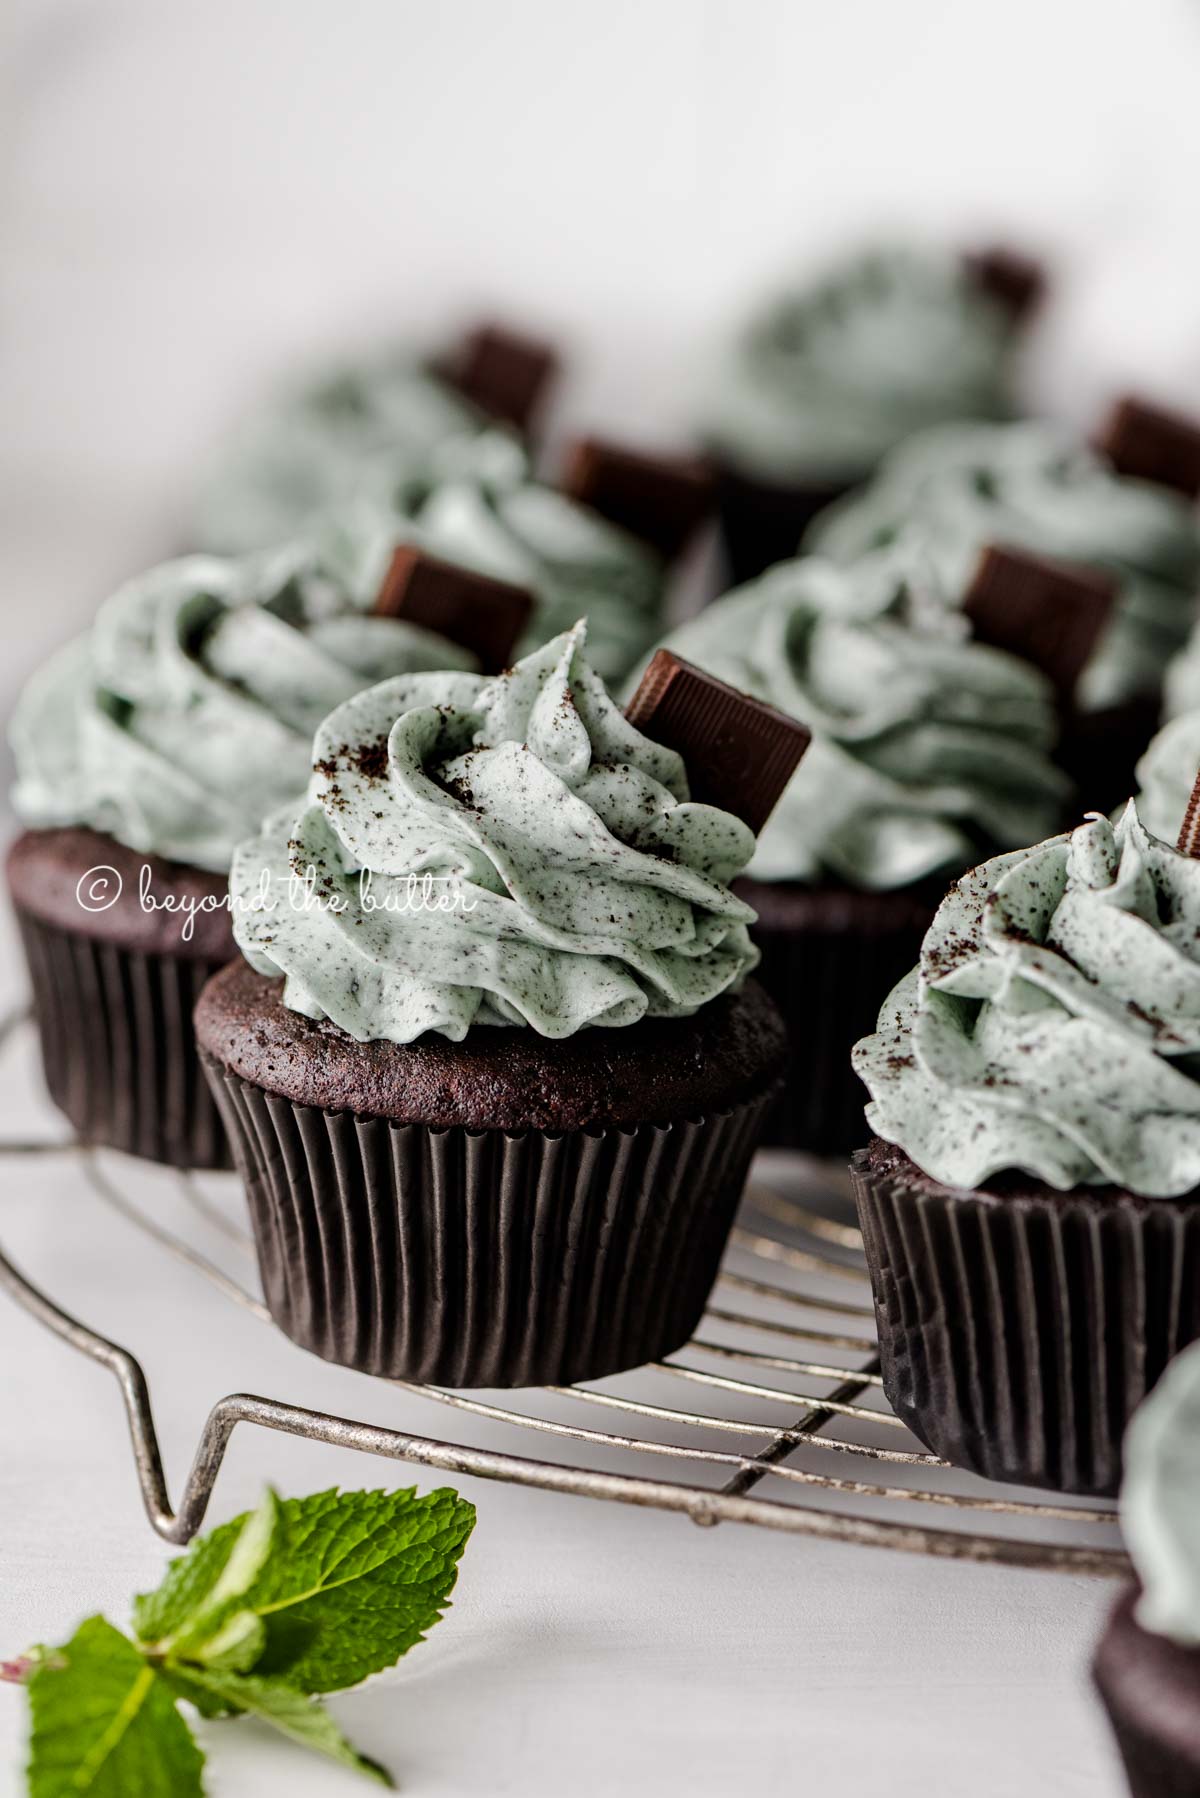 Mint chocolate cupcakes on wire cooling rack garnished with Andes mints and a sprig of mint| All images © Beyond the Butter®